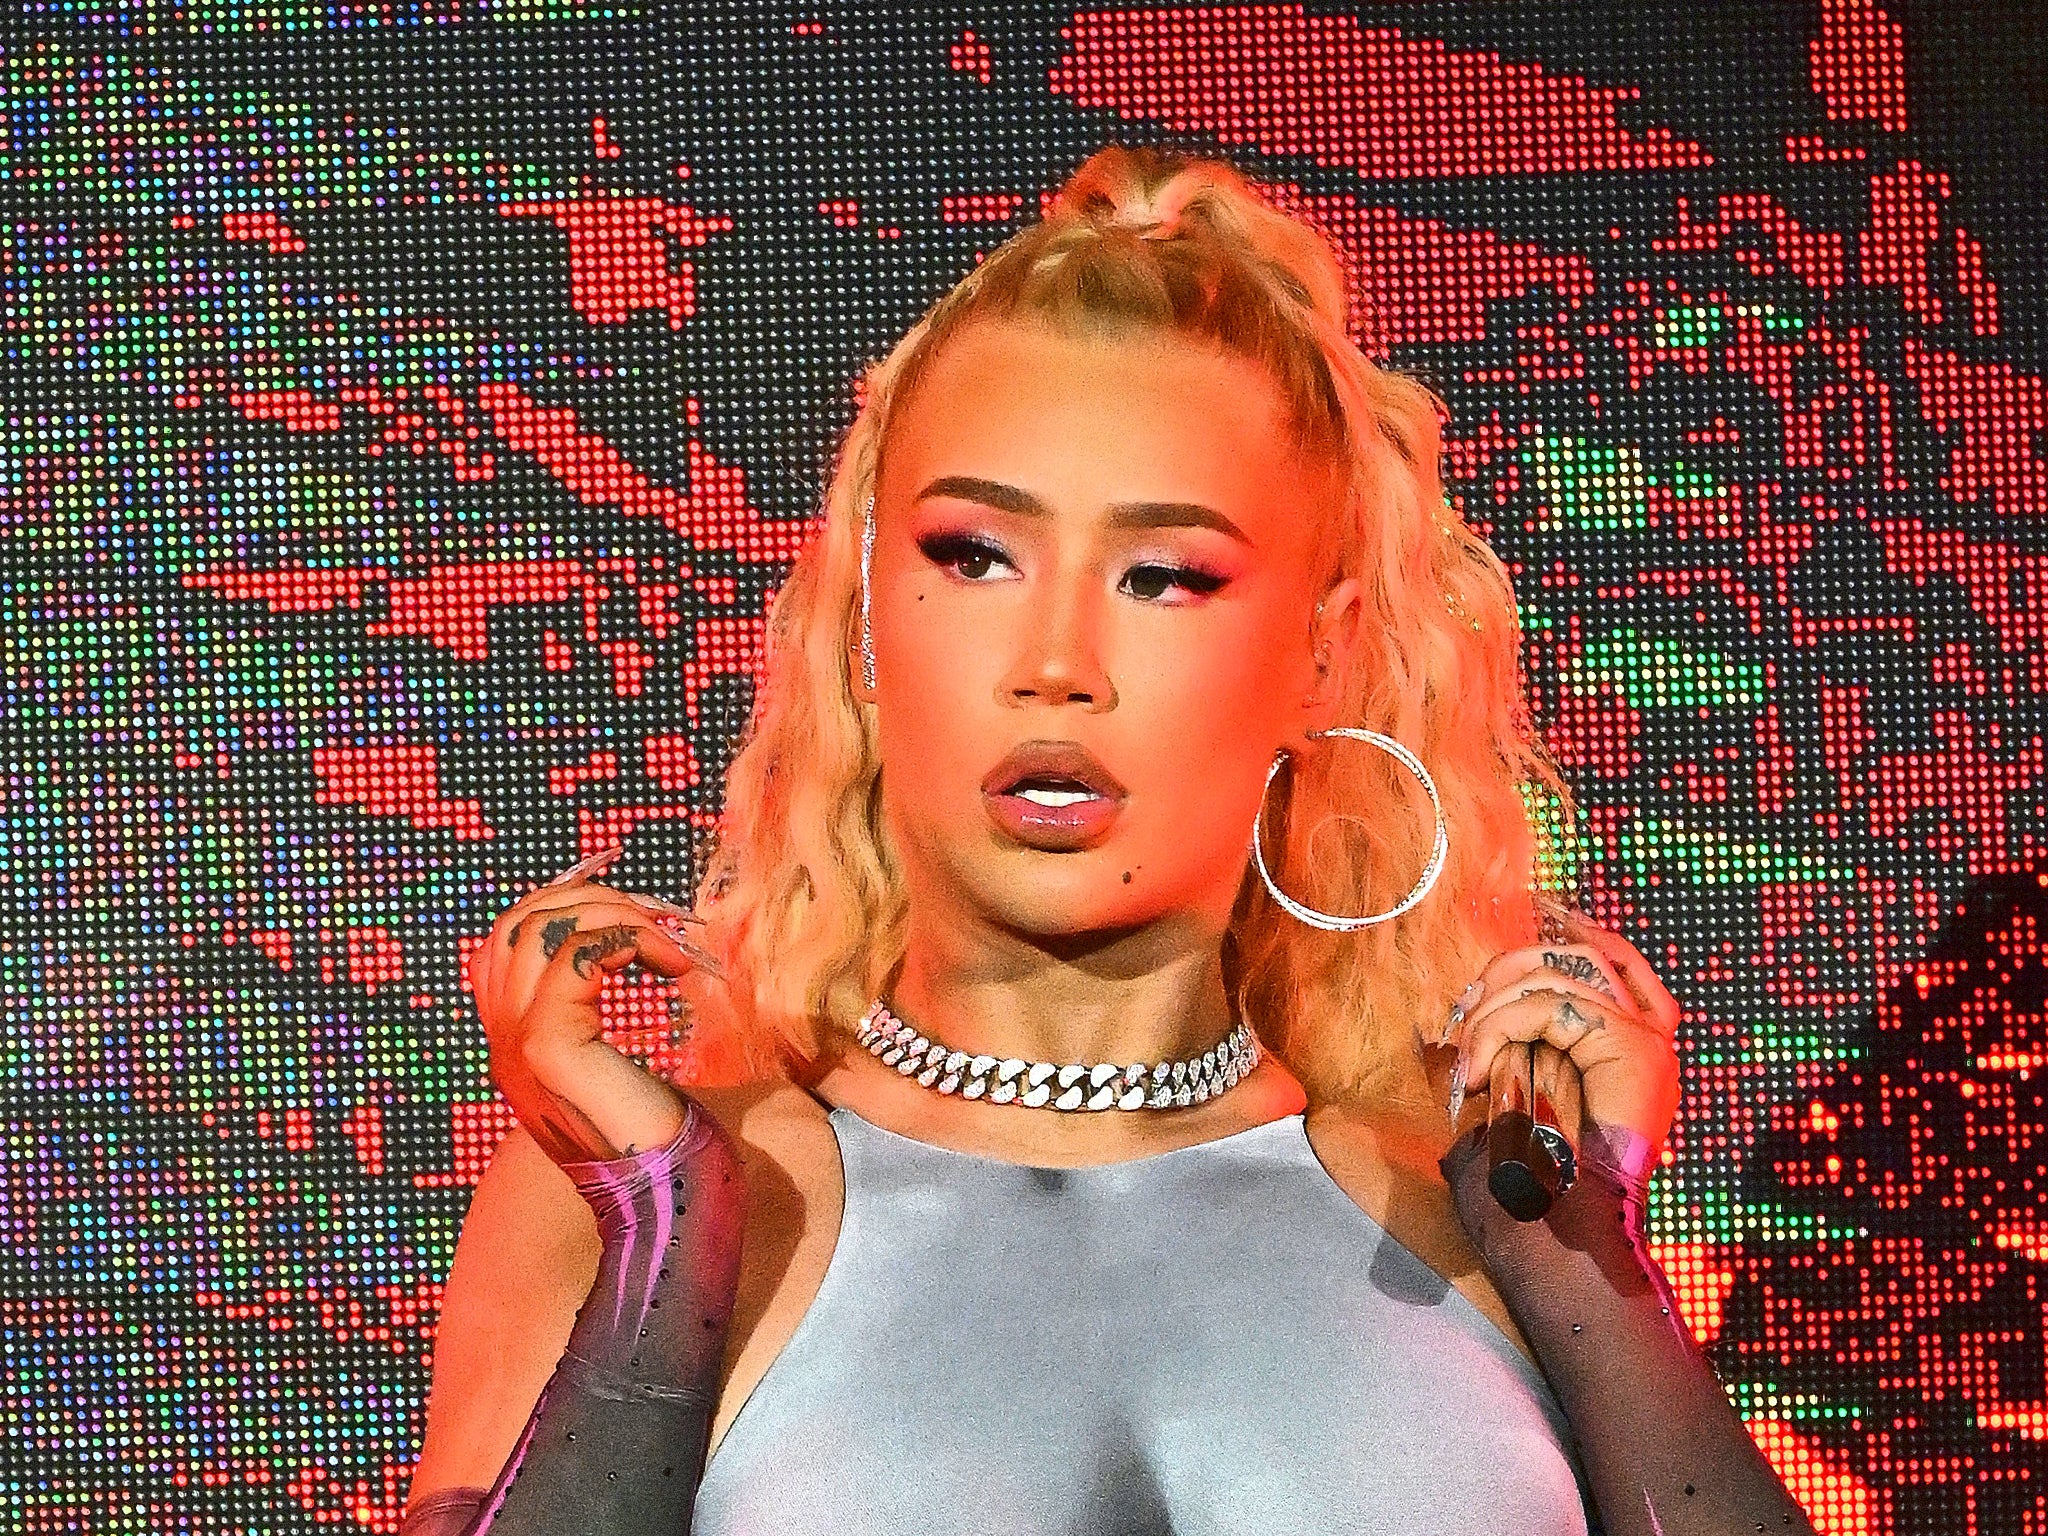 Iggy Azalea OnlyFans has been a home for safe sex work pic